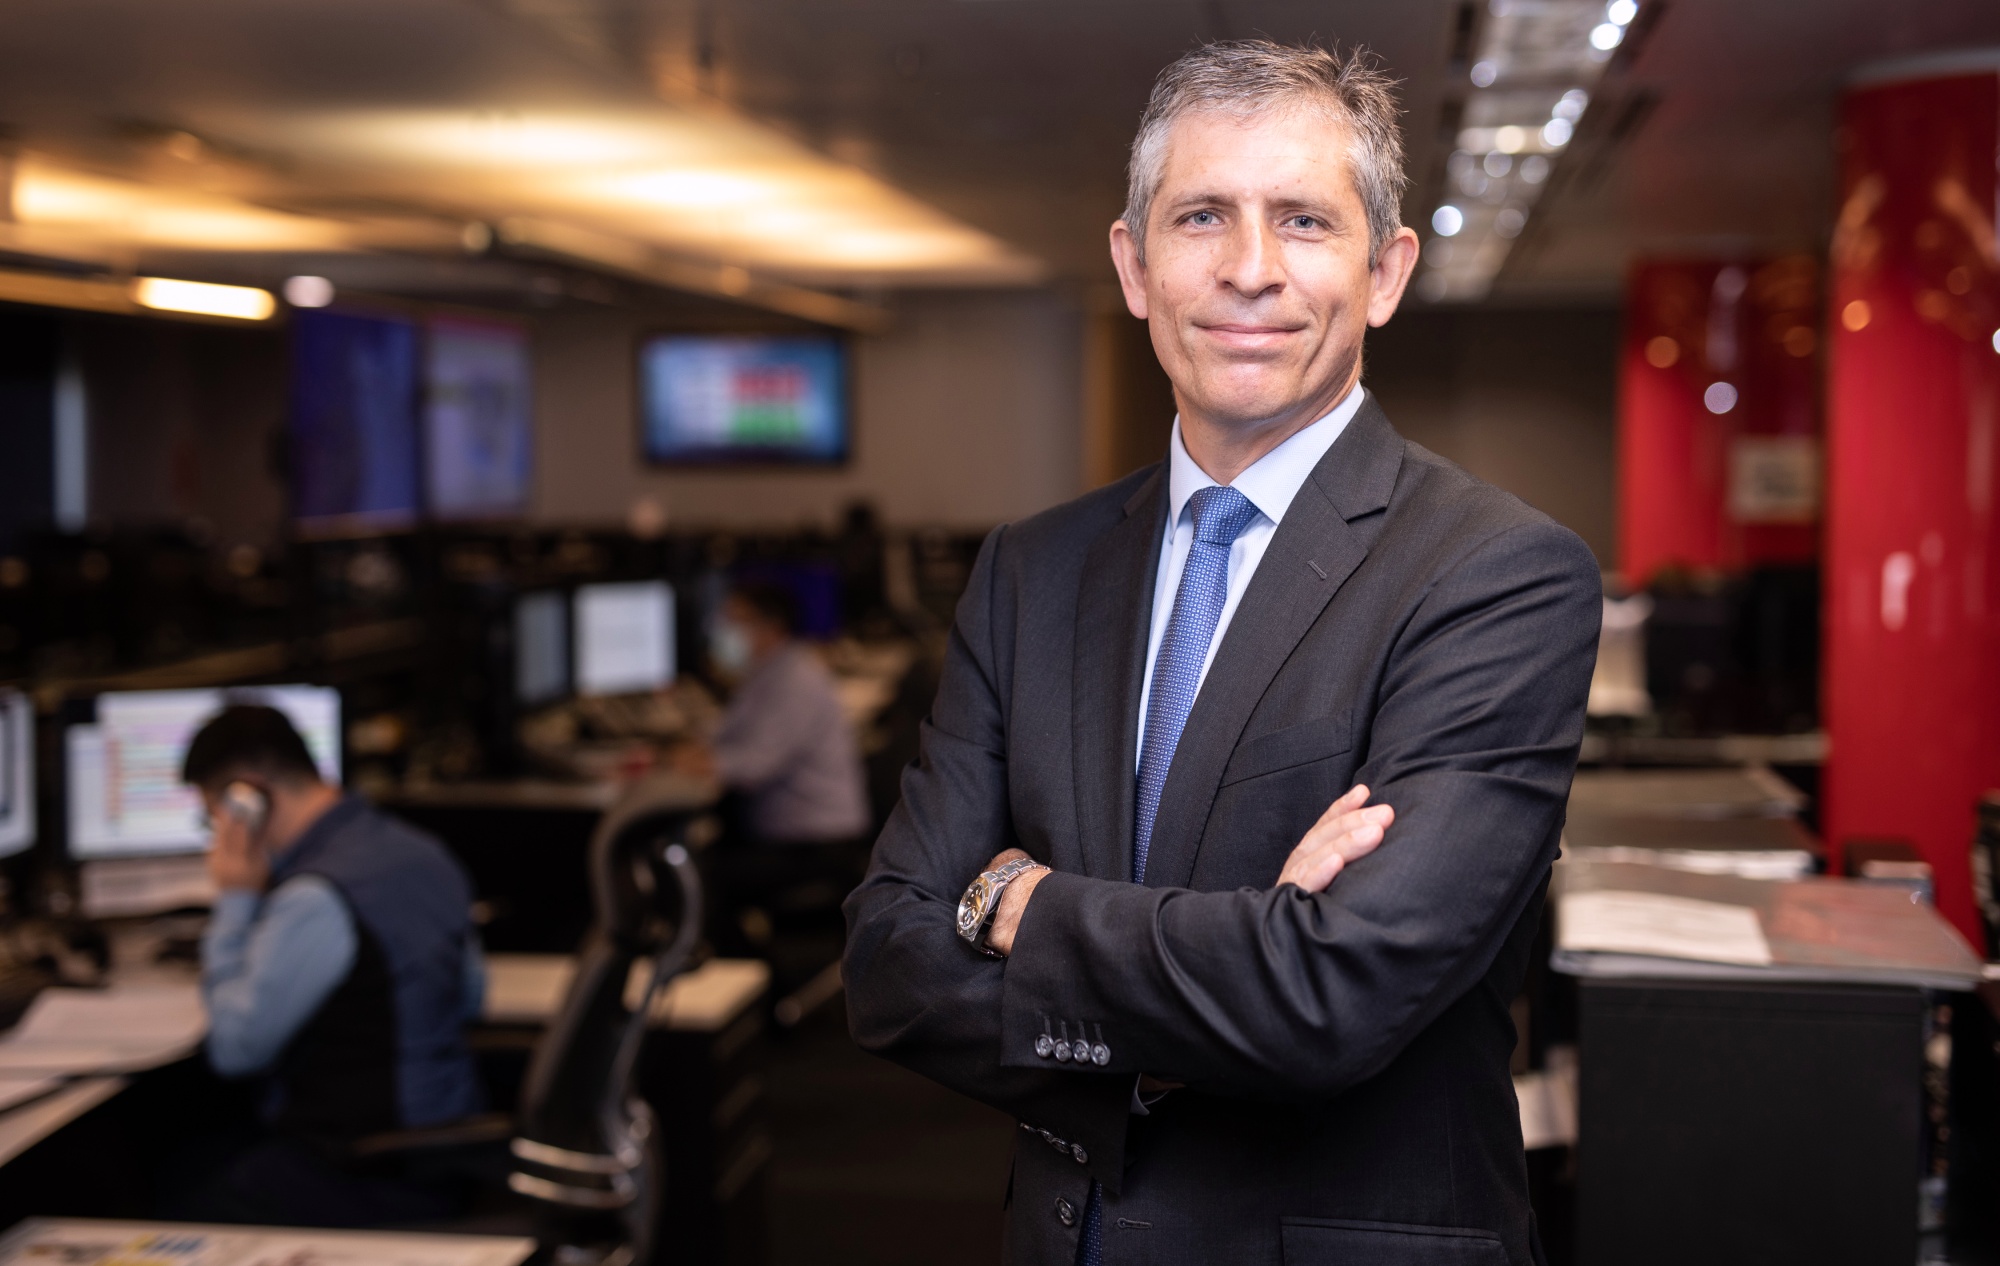 Jon Toller, General Manager of Integrated Operations Centre, Cathay Pacific